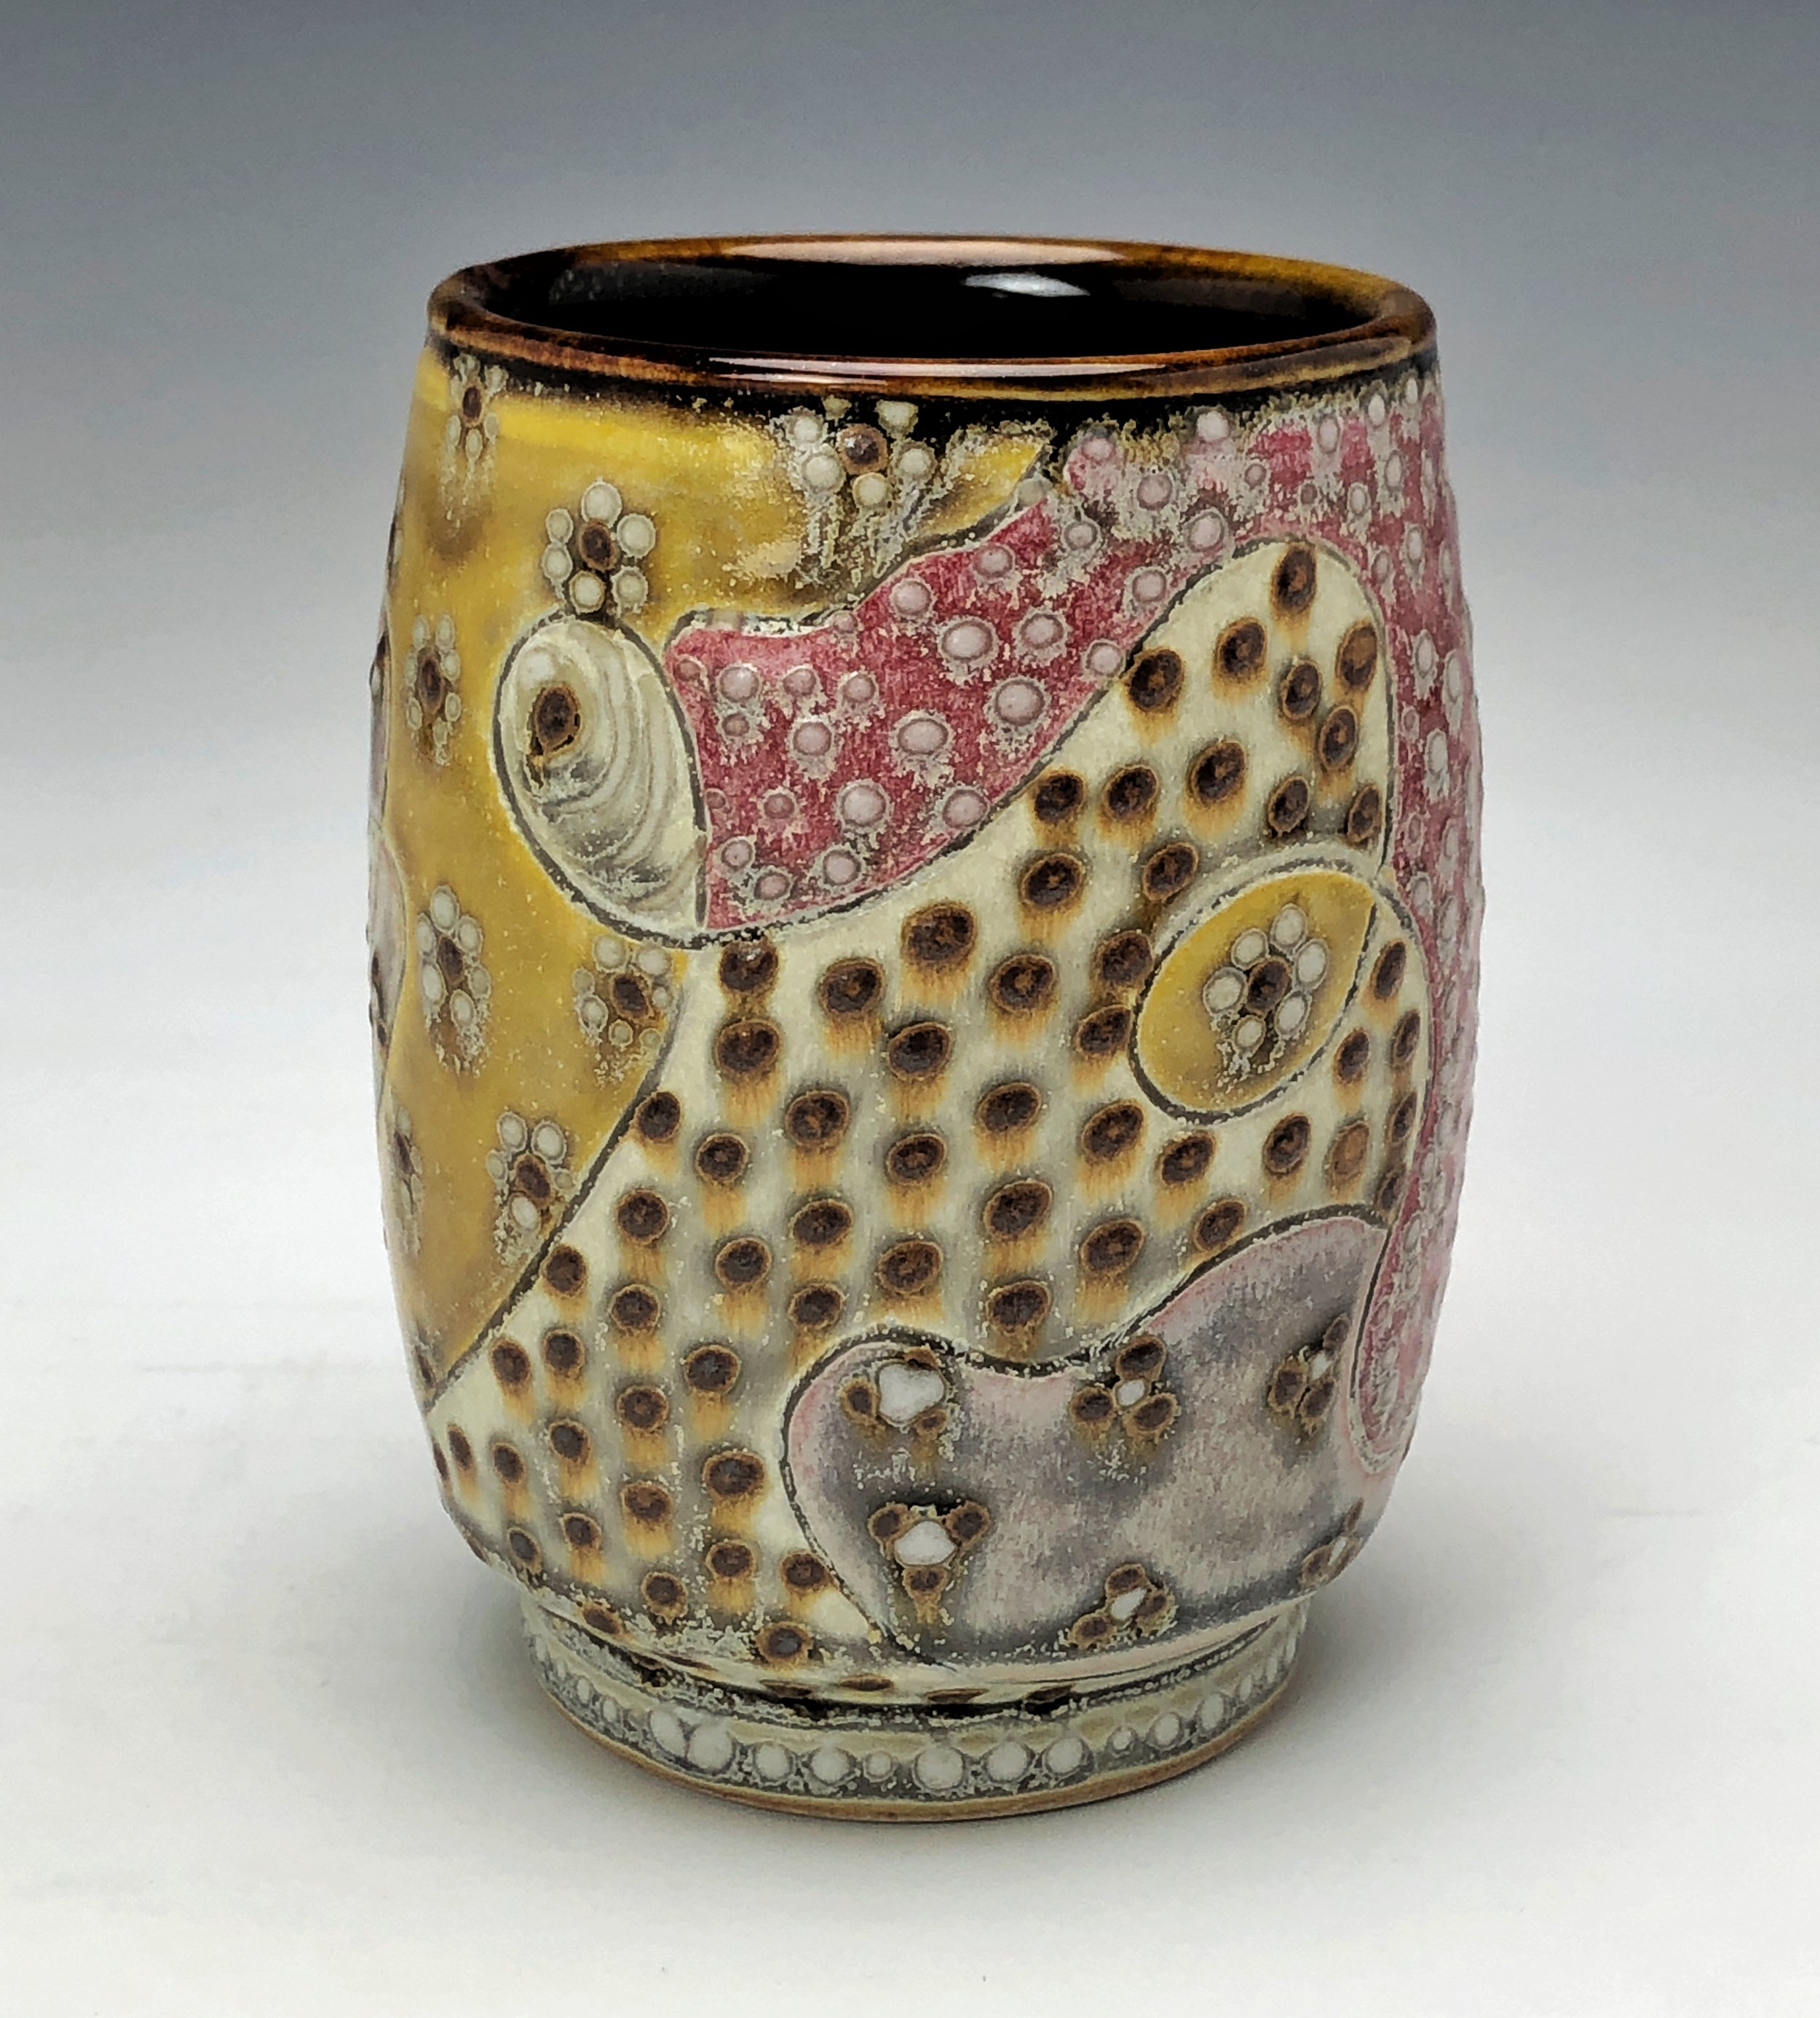  Samantha Henneke, Bulldog Pottery, Seagrove, North Carolina  Yunomi 3- Casual drinking cup made from a smooth white porcelaneous clay body. Pattern Medley patterns are made with slip and glaze dot patterns. Translucent vellum glaze over various unde